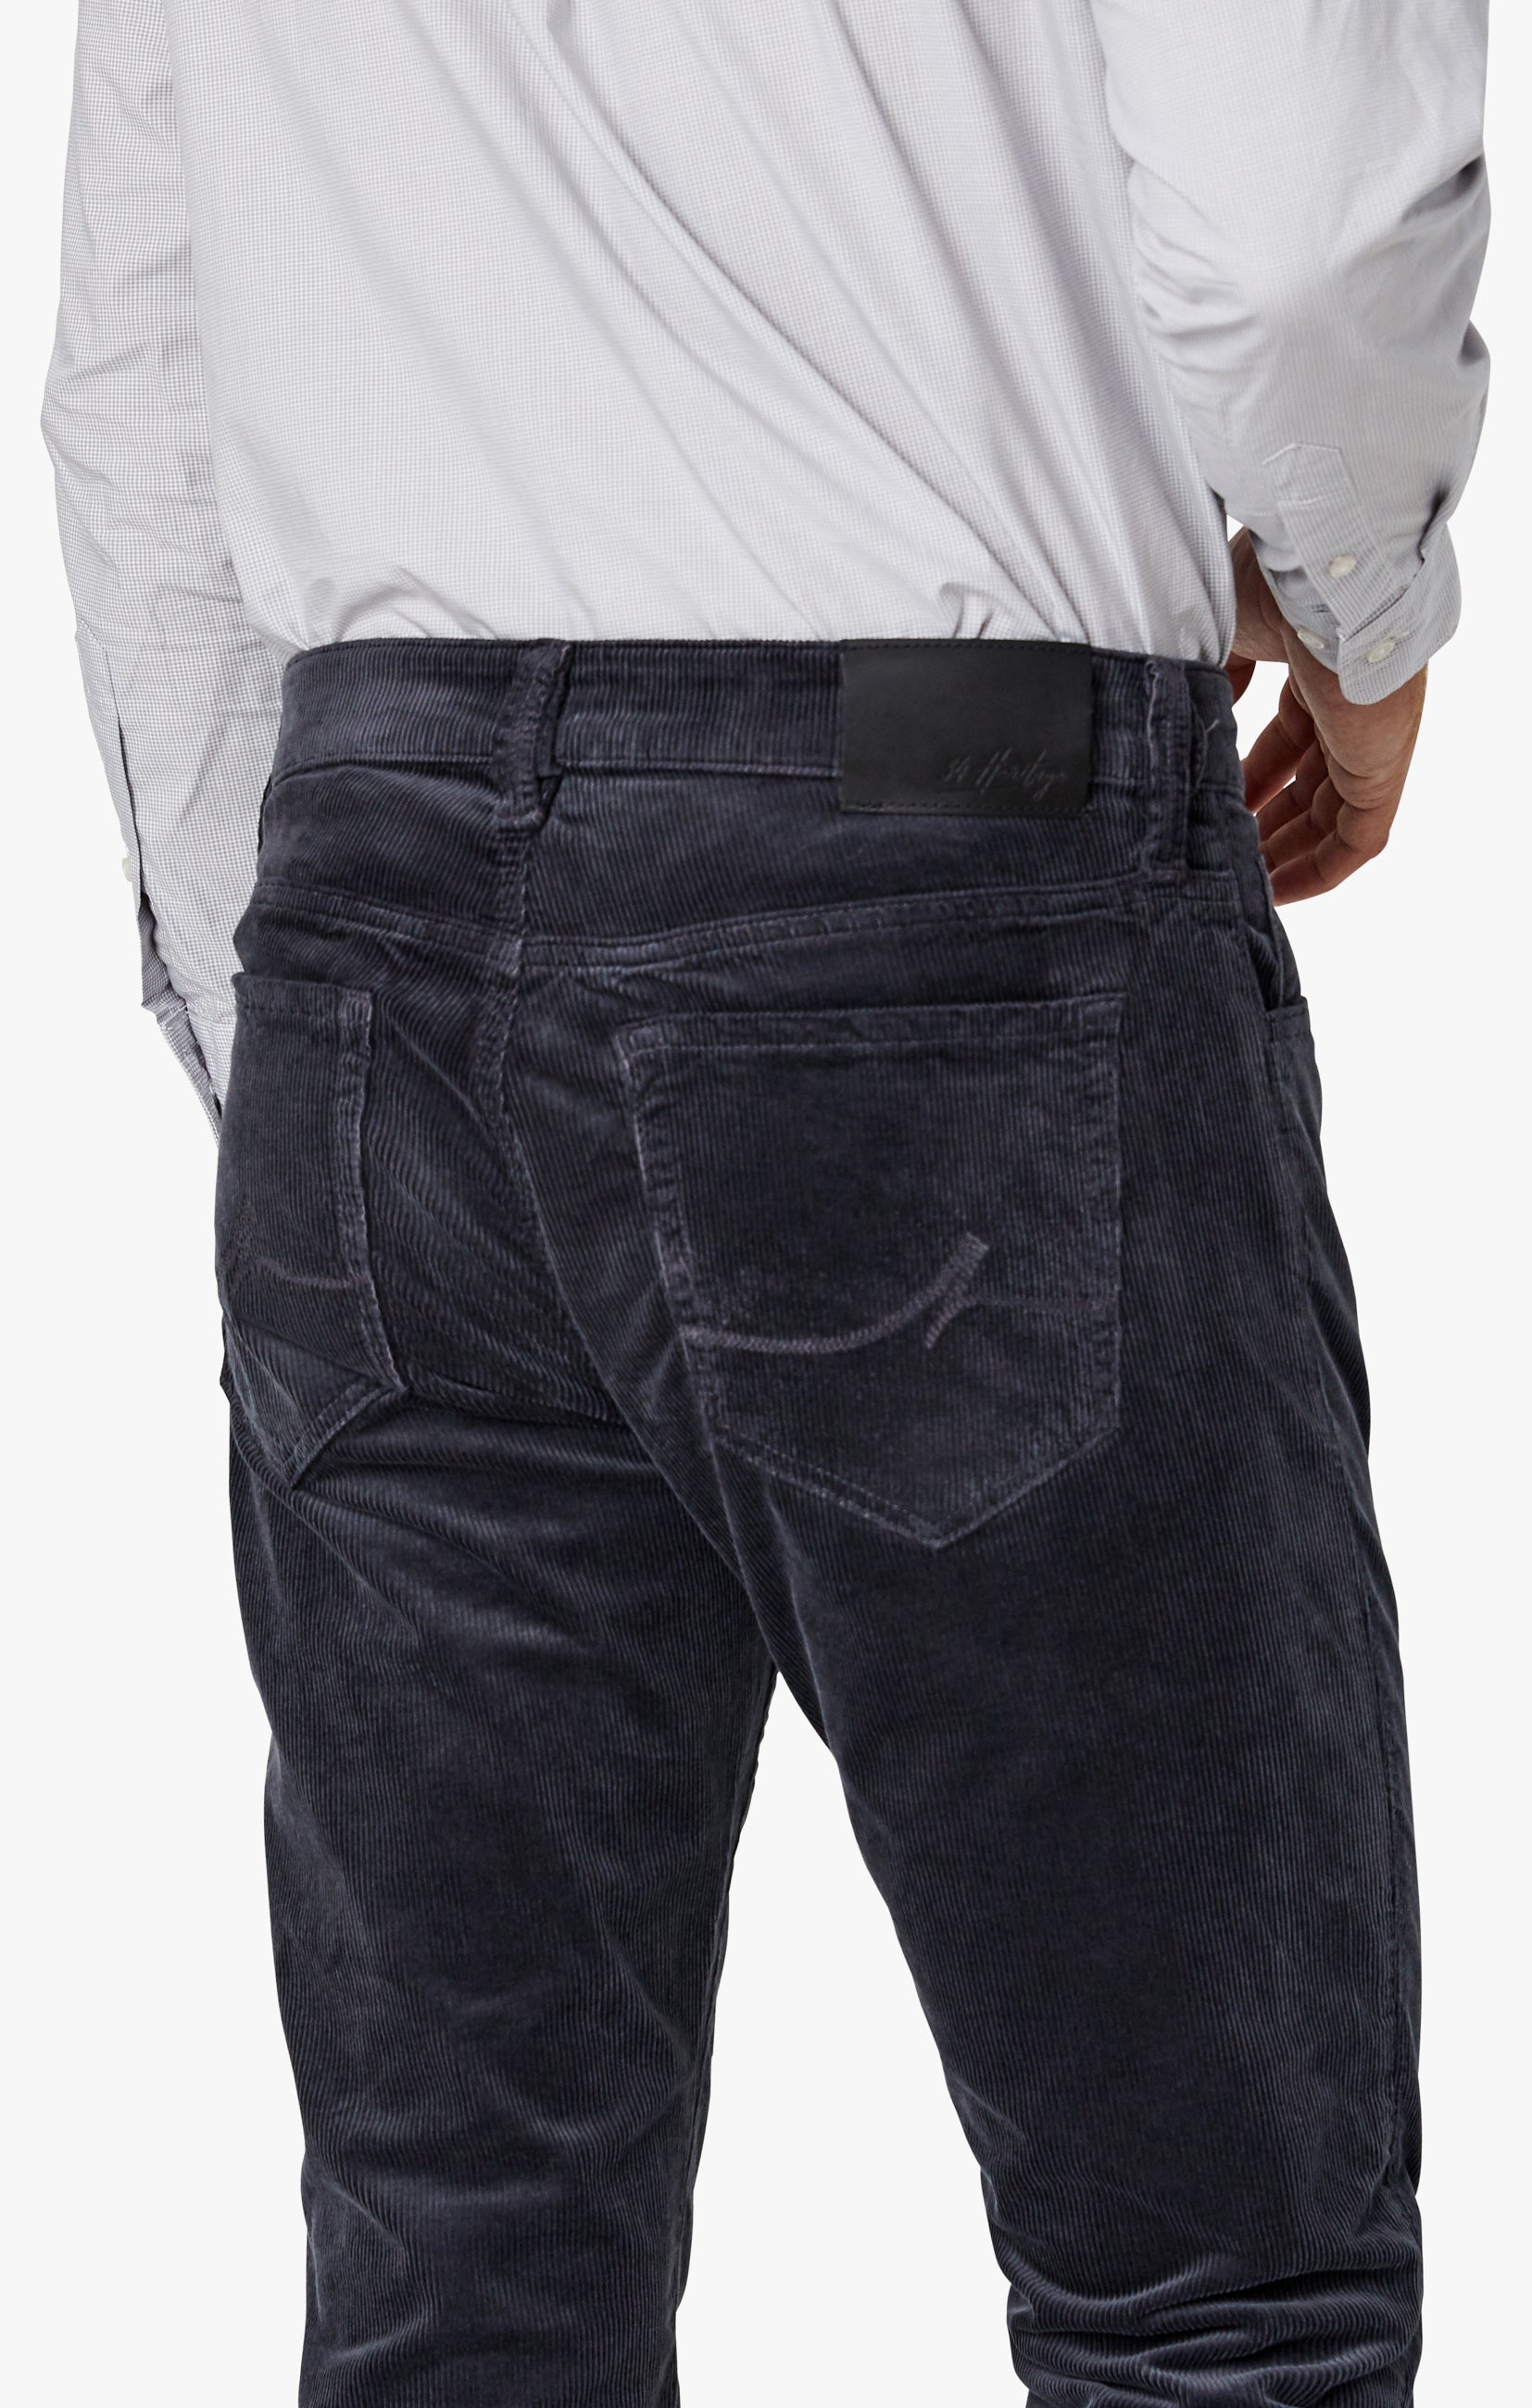 Charisma Relaxed Straight Pants in Iron Cord Image 5